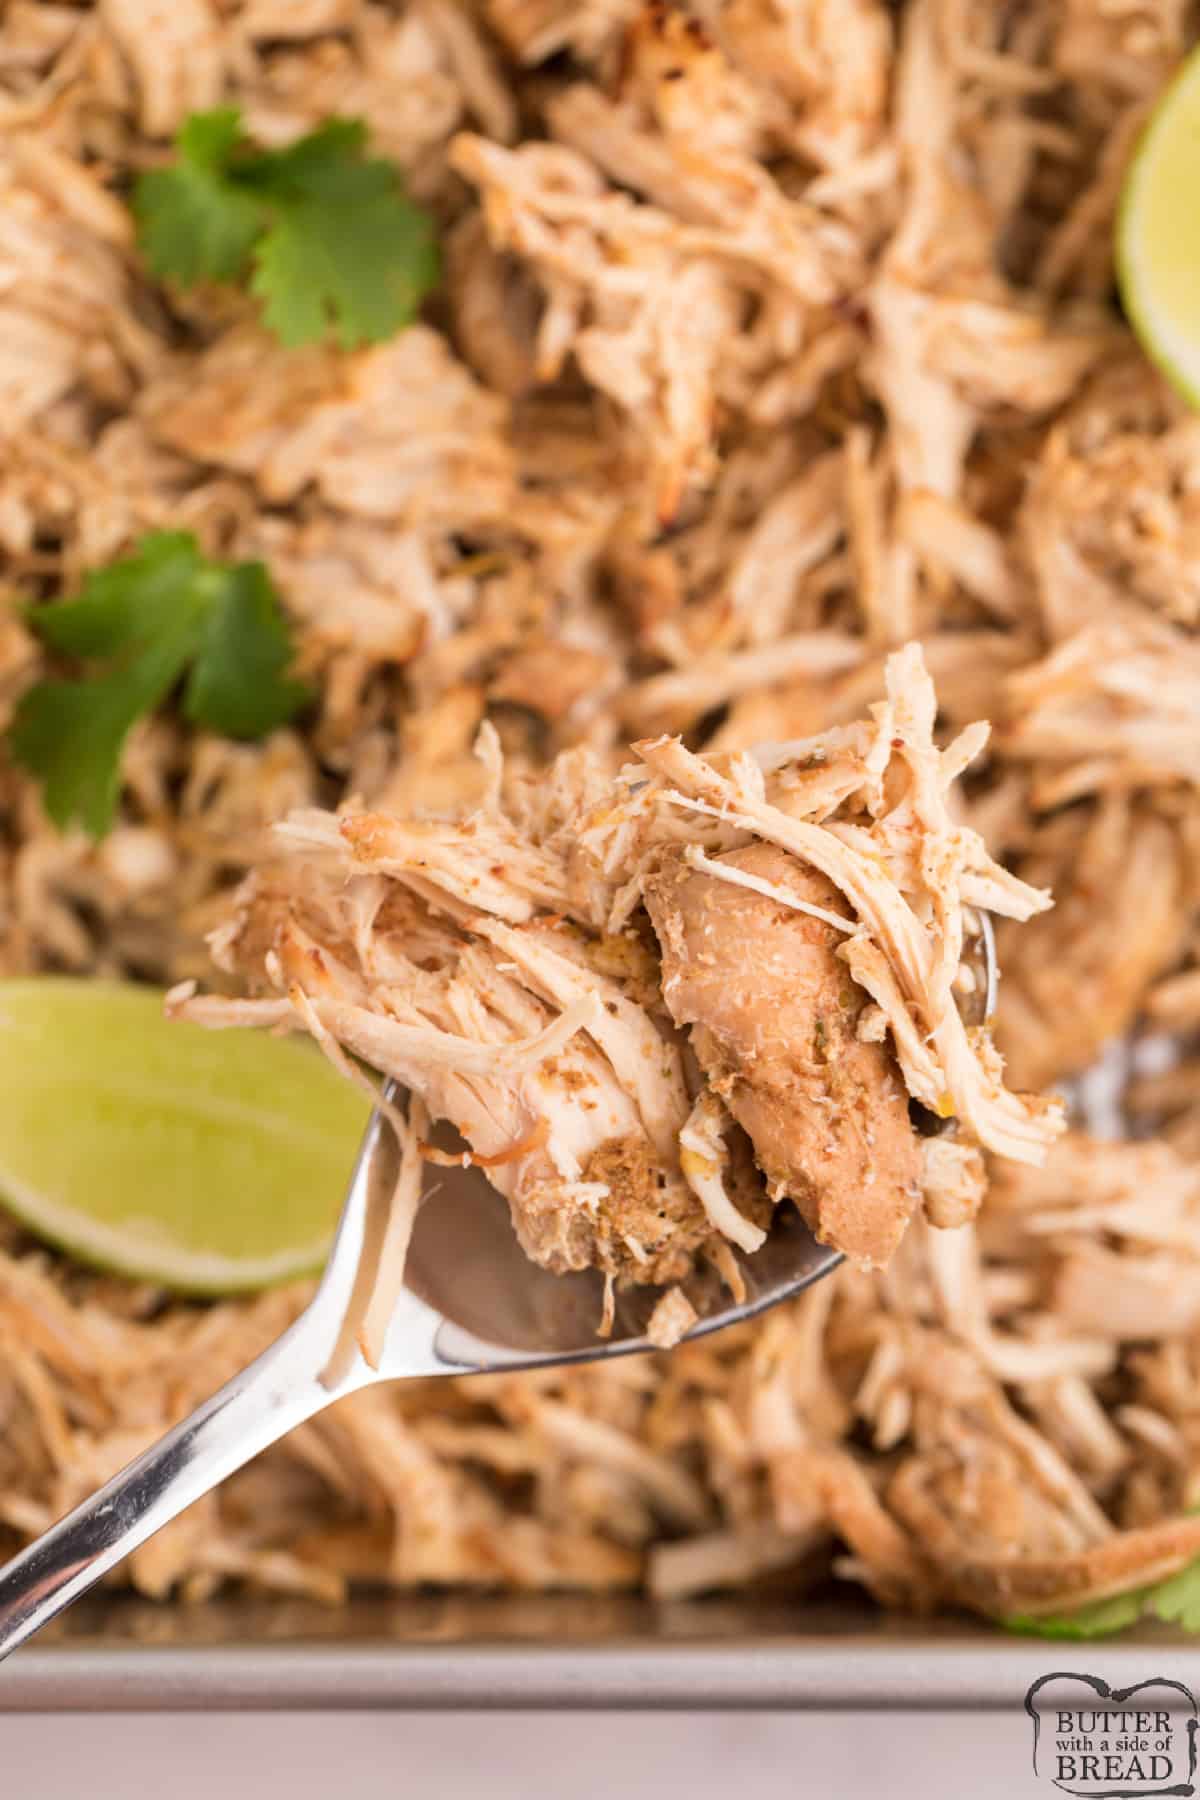 Shredded chicken with mexican seasonings 